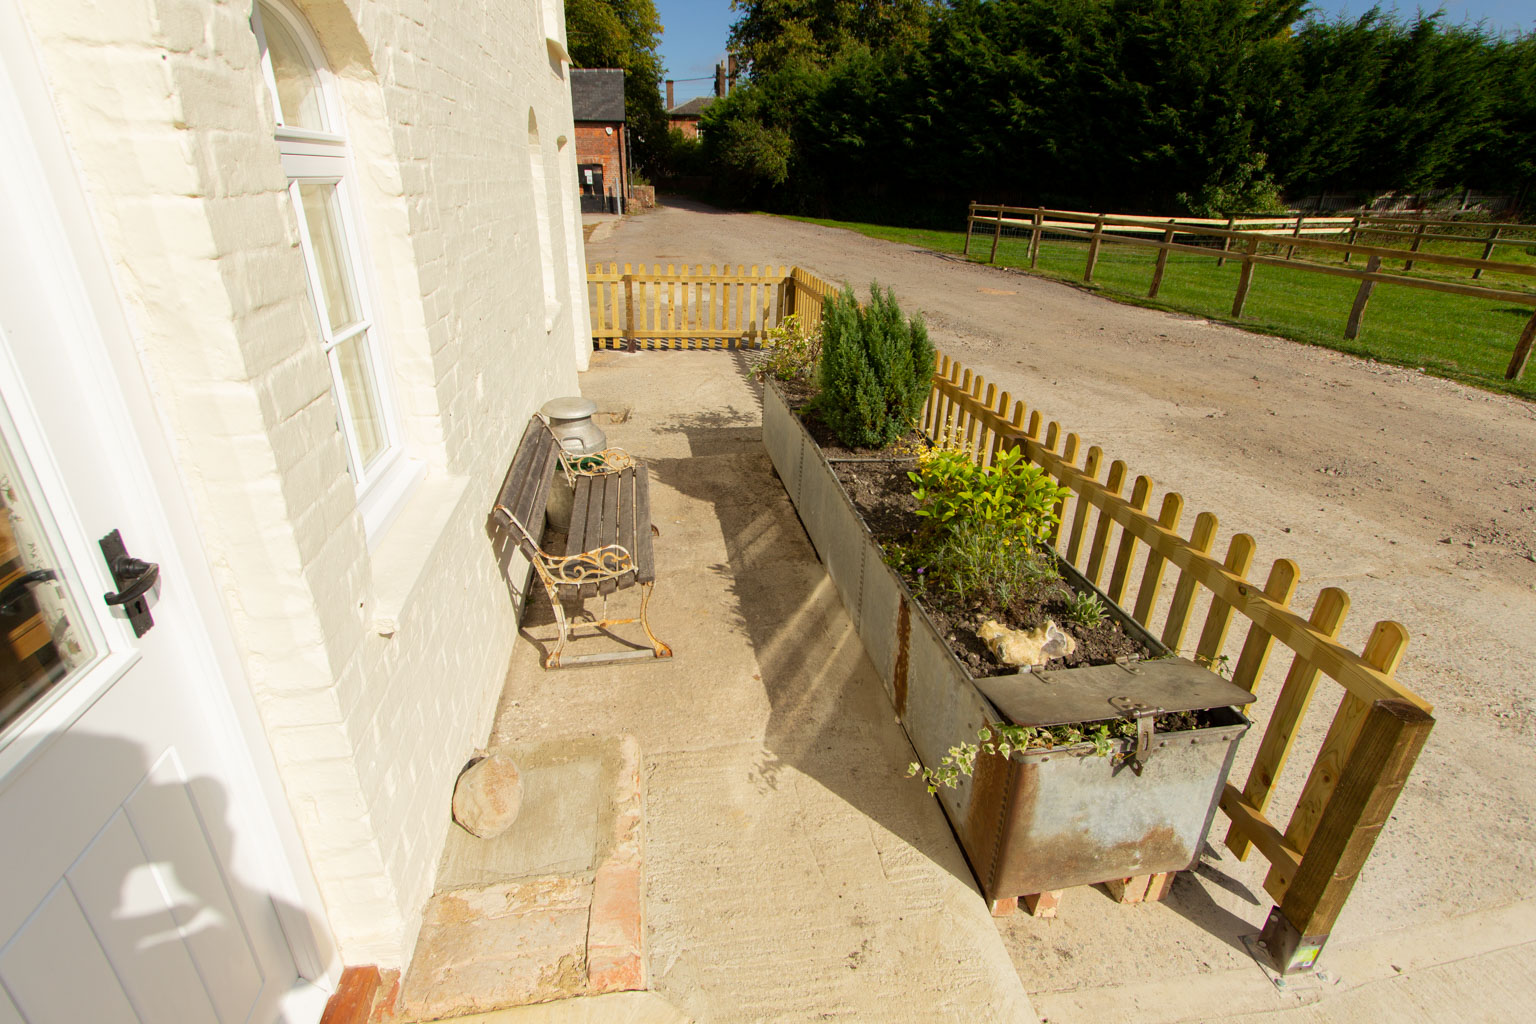 The perfect bench for your morning coffee with our farm fashioned flowery water trough.